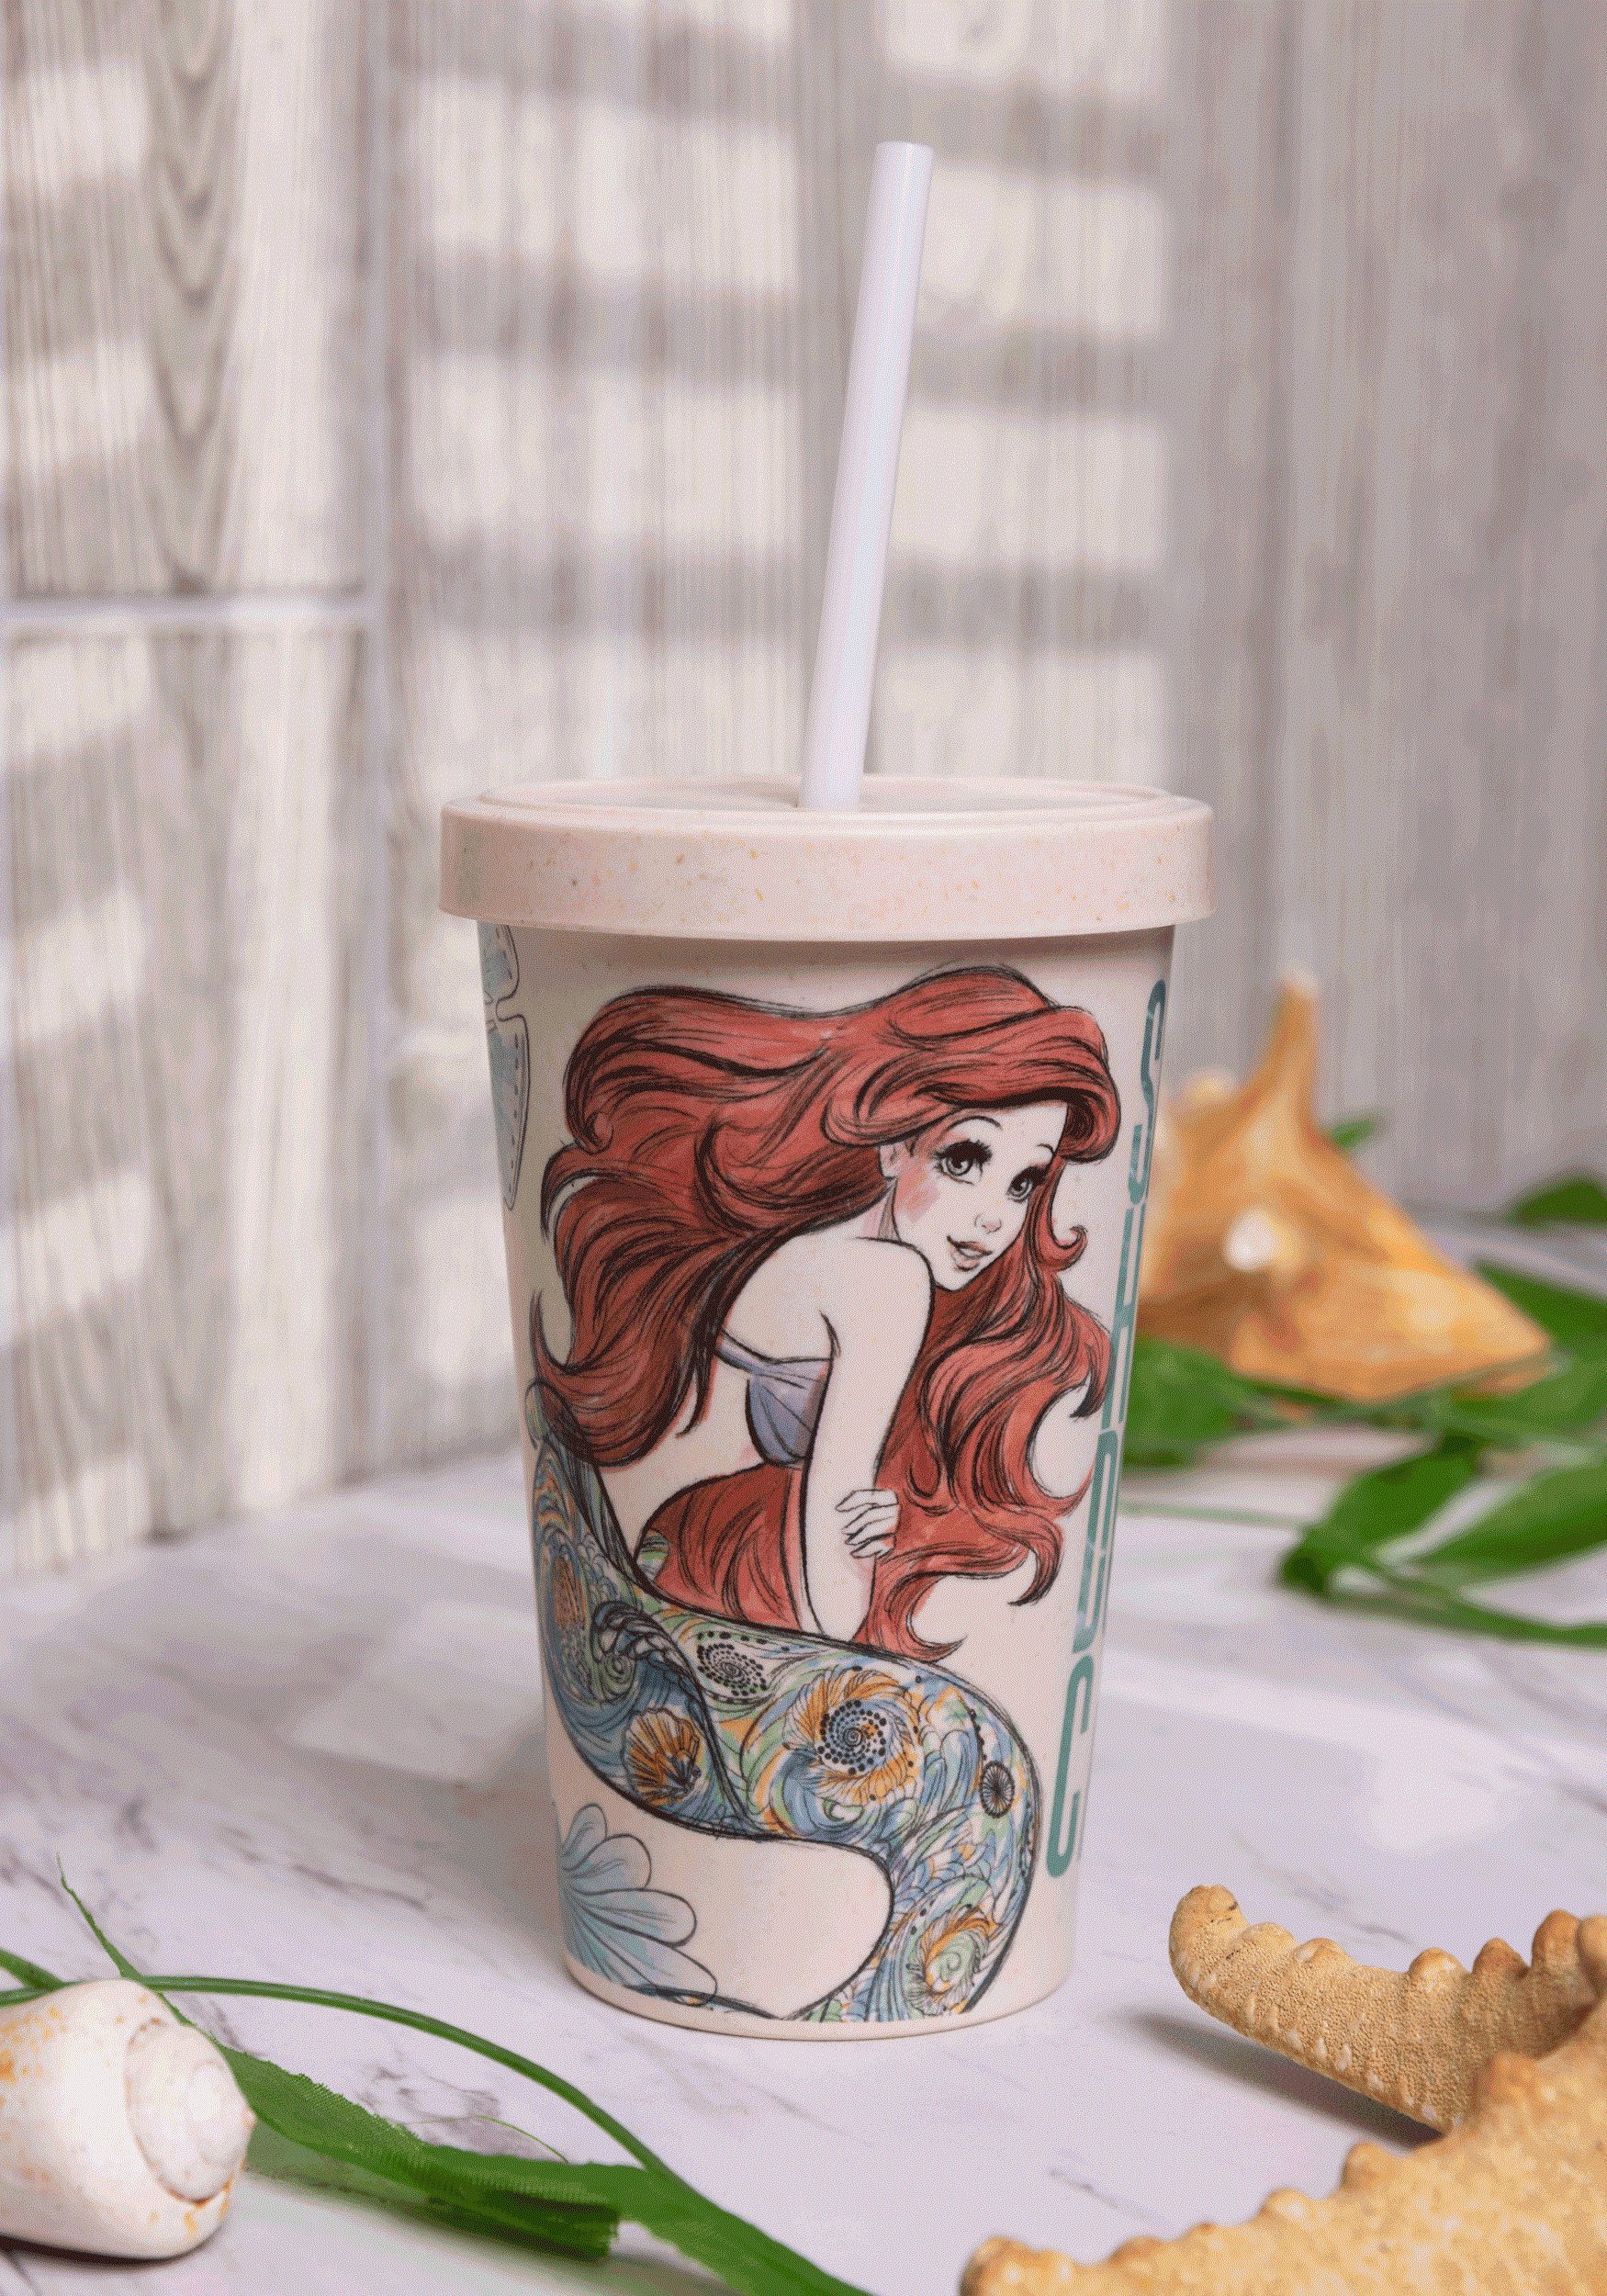 https://images.fun.com/products/84041/2-1-275820/disney-little-mermaid-salty-hair-dont-care-bamboo-alt-1.gif